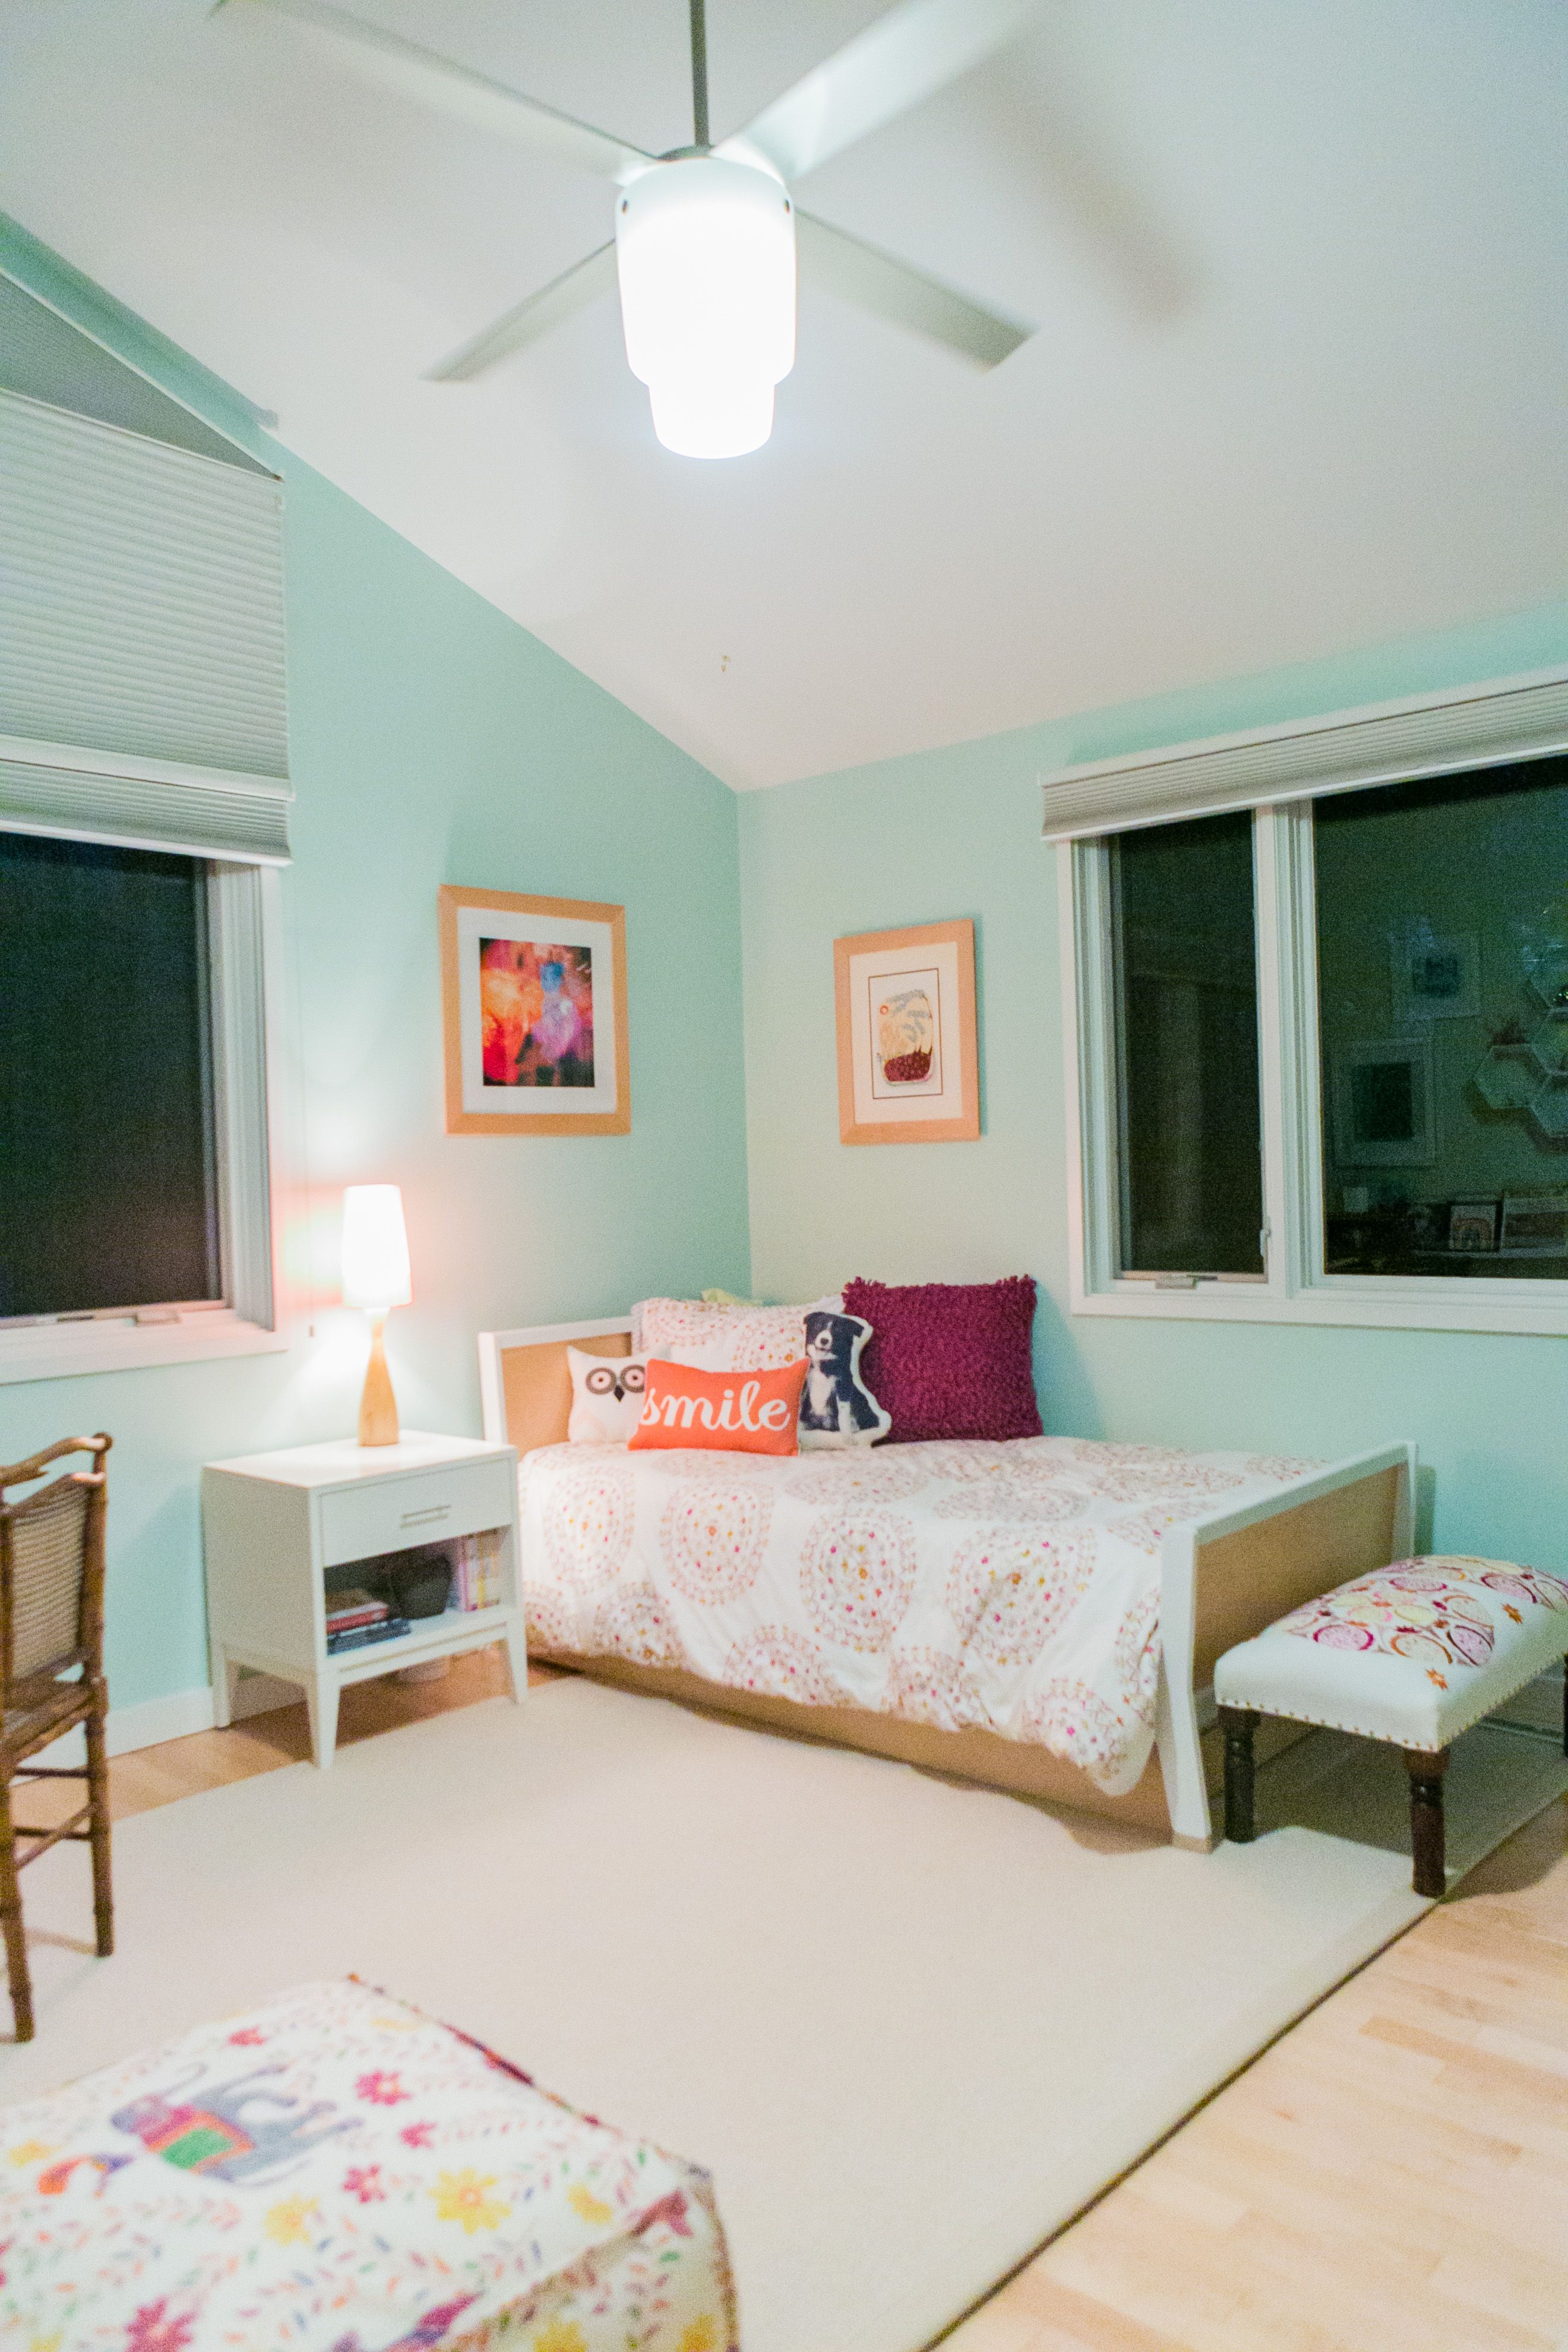 Traditional Bedroom Remodel For Chic Kids Bedroom (View 8 of 35)